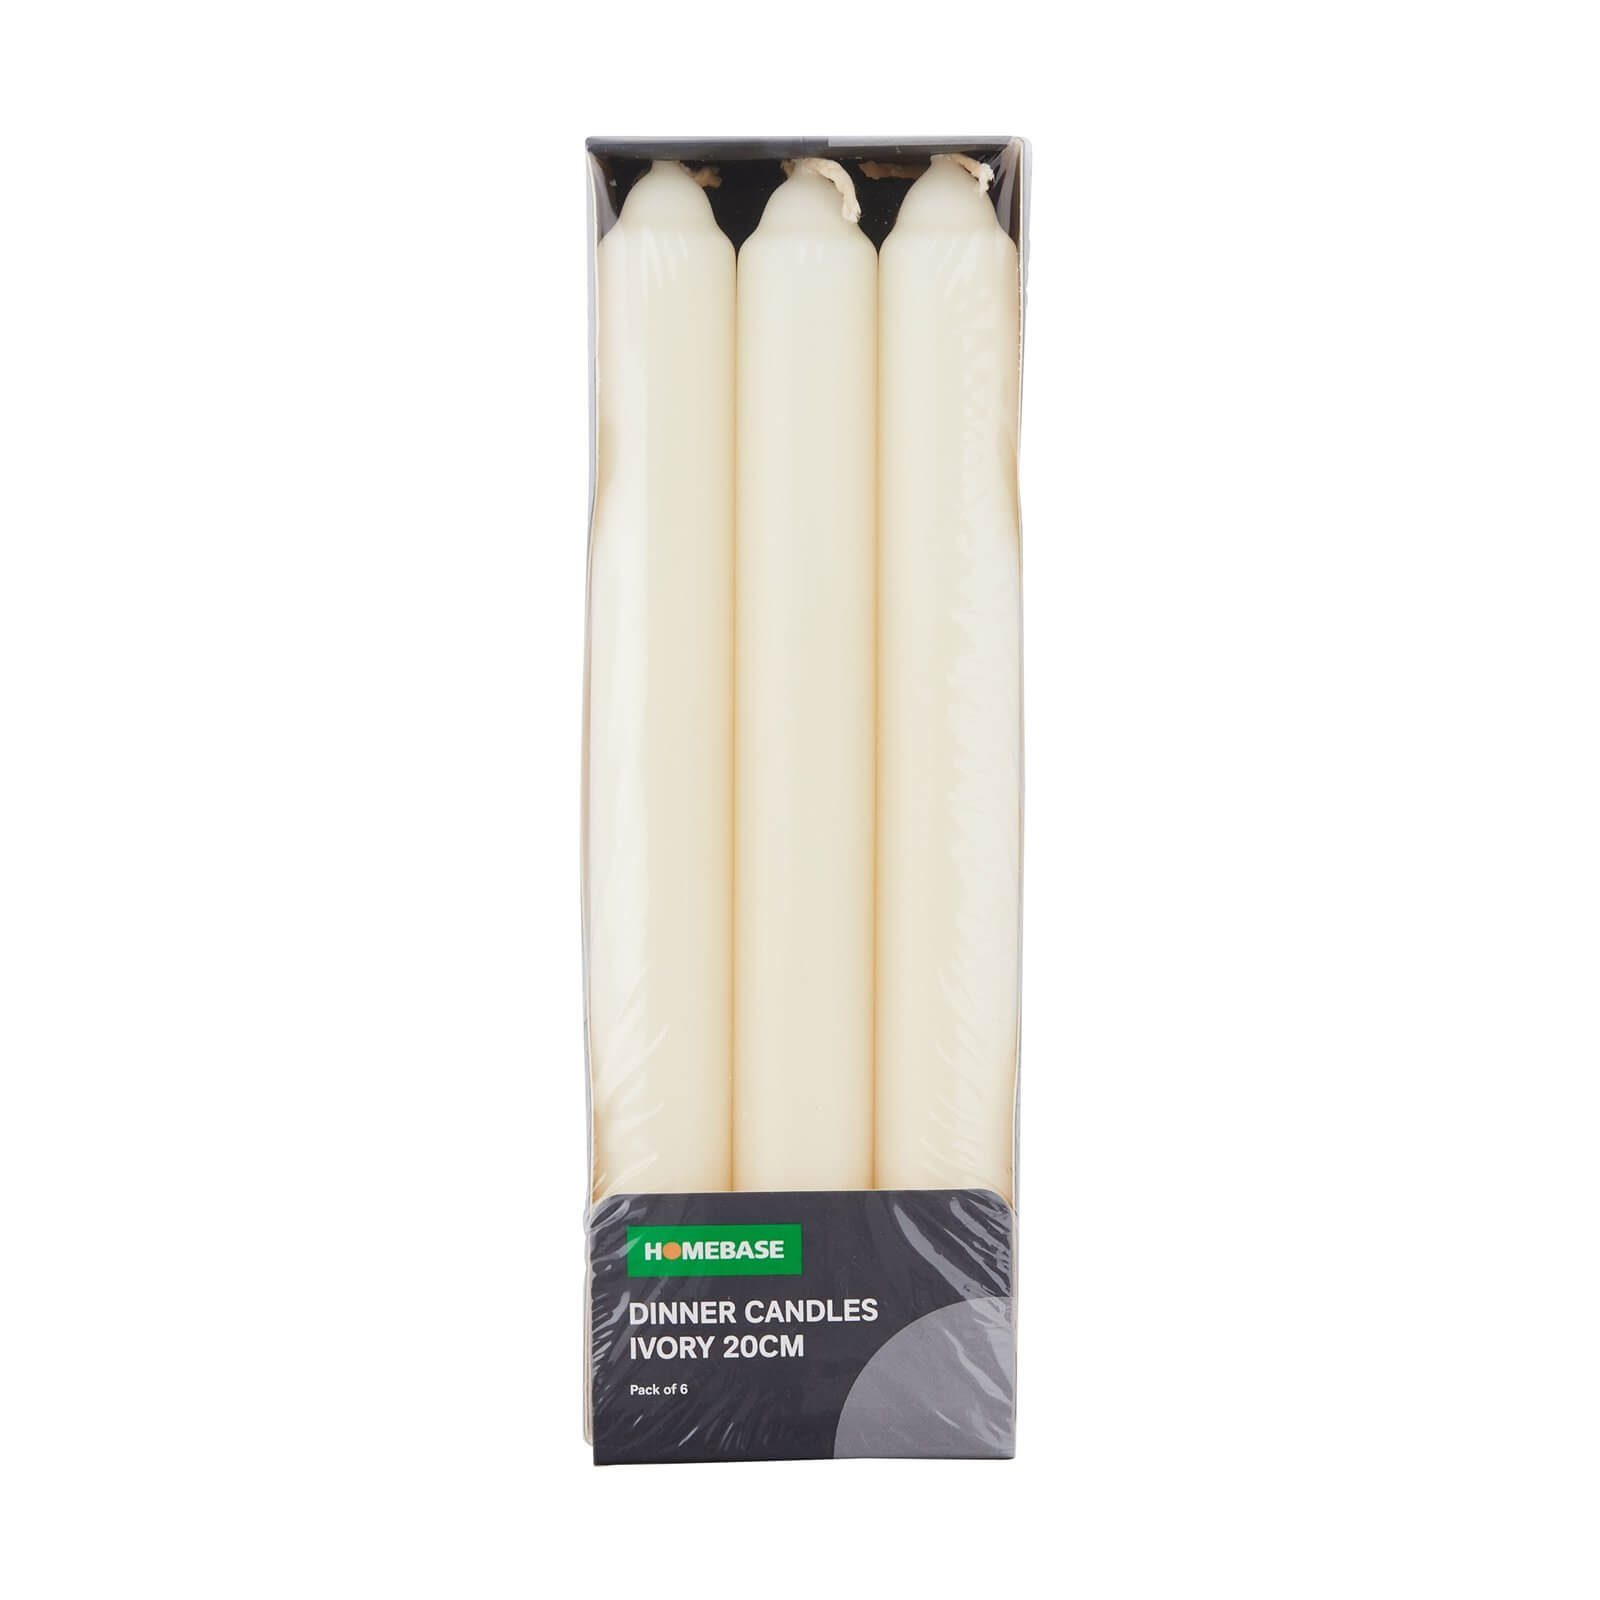 Pack of 6 Dinner Candles - Ivory - 20cm